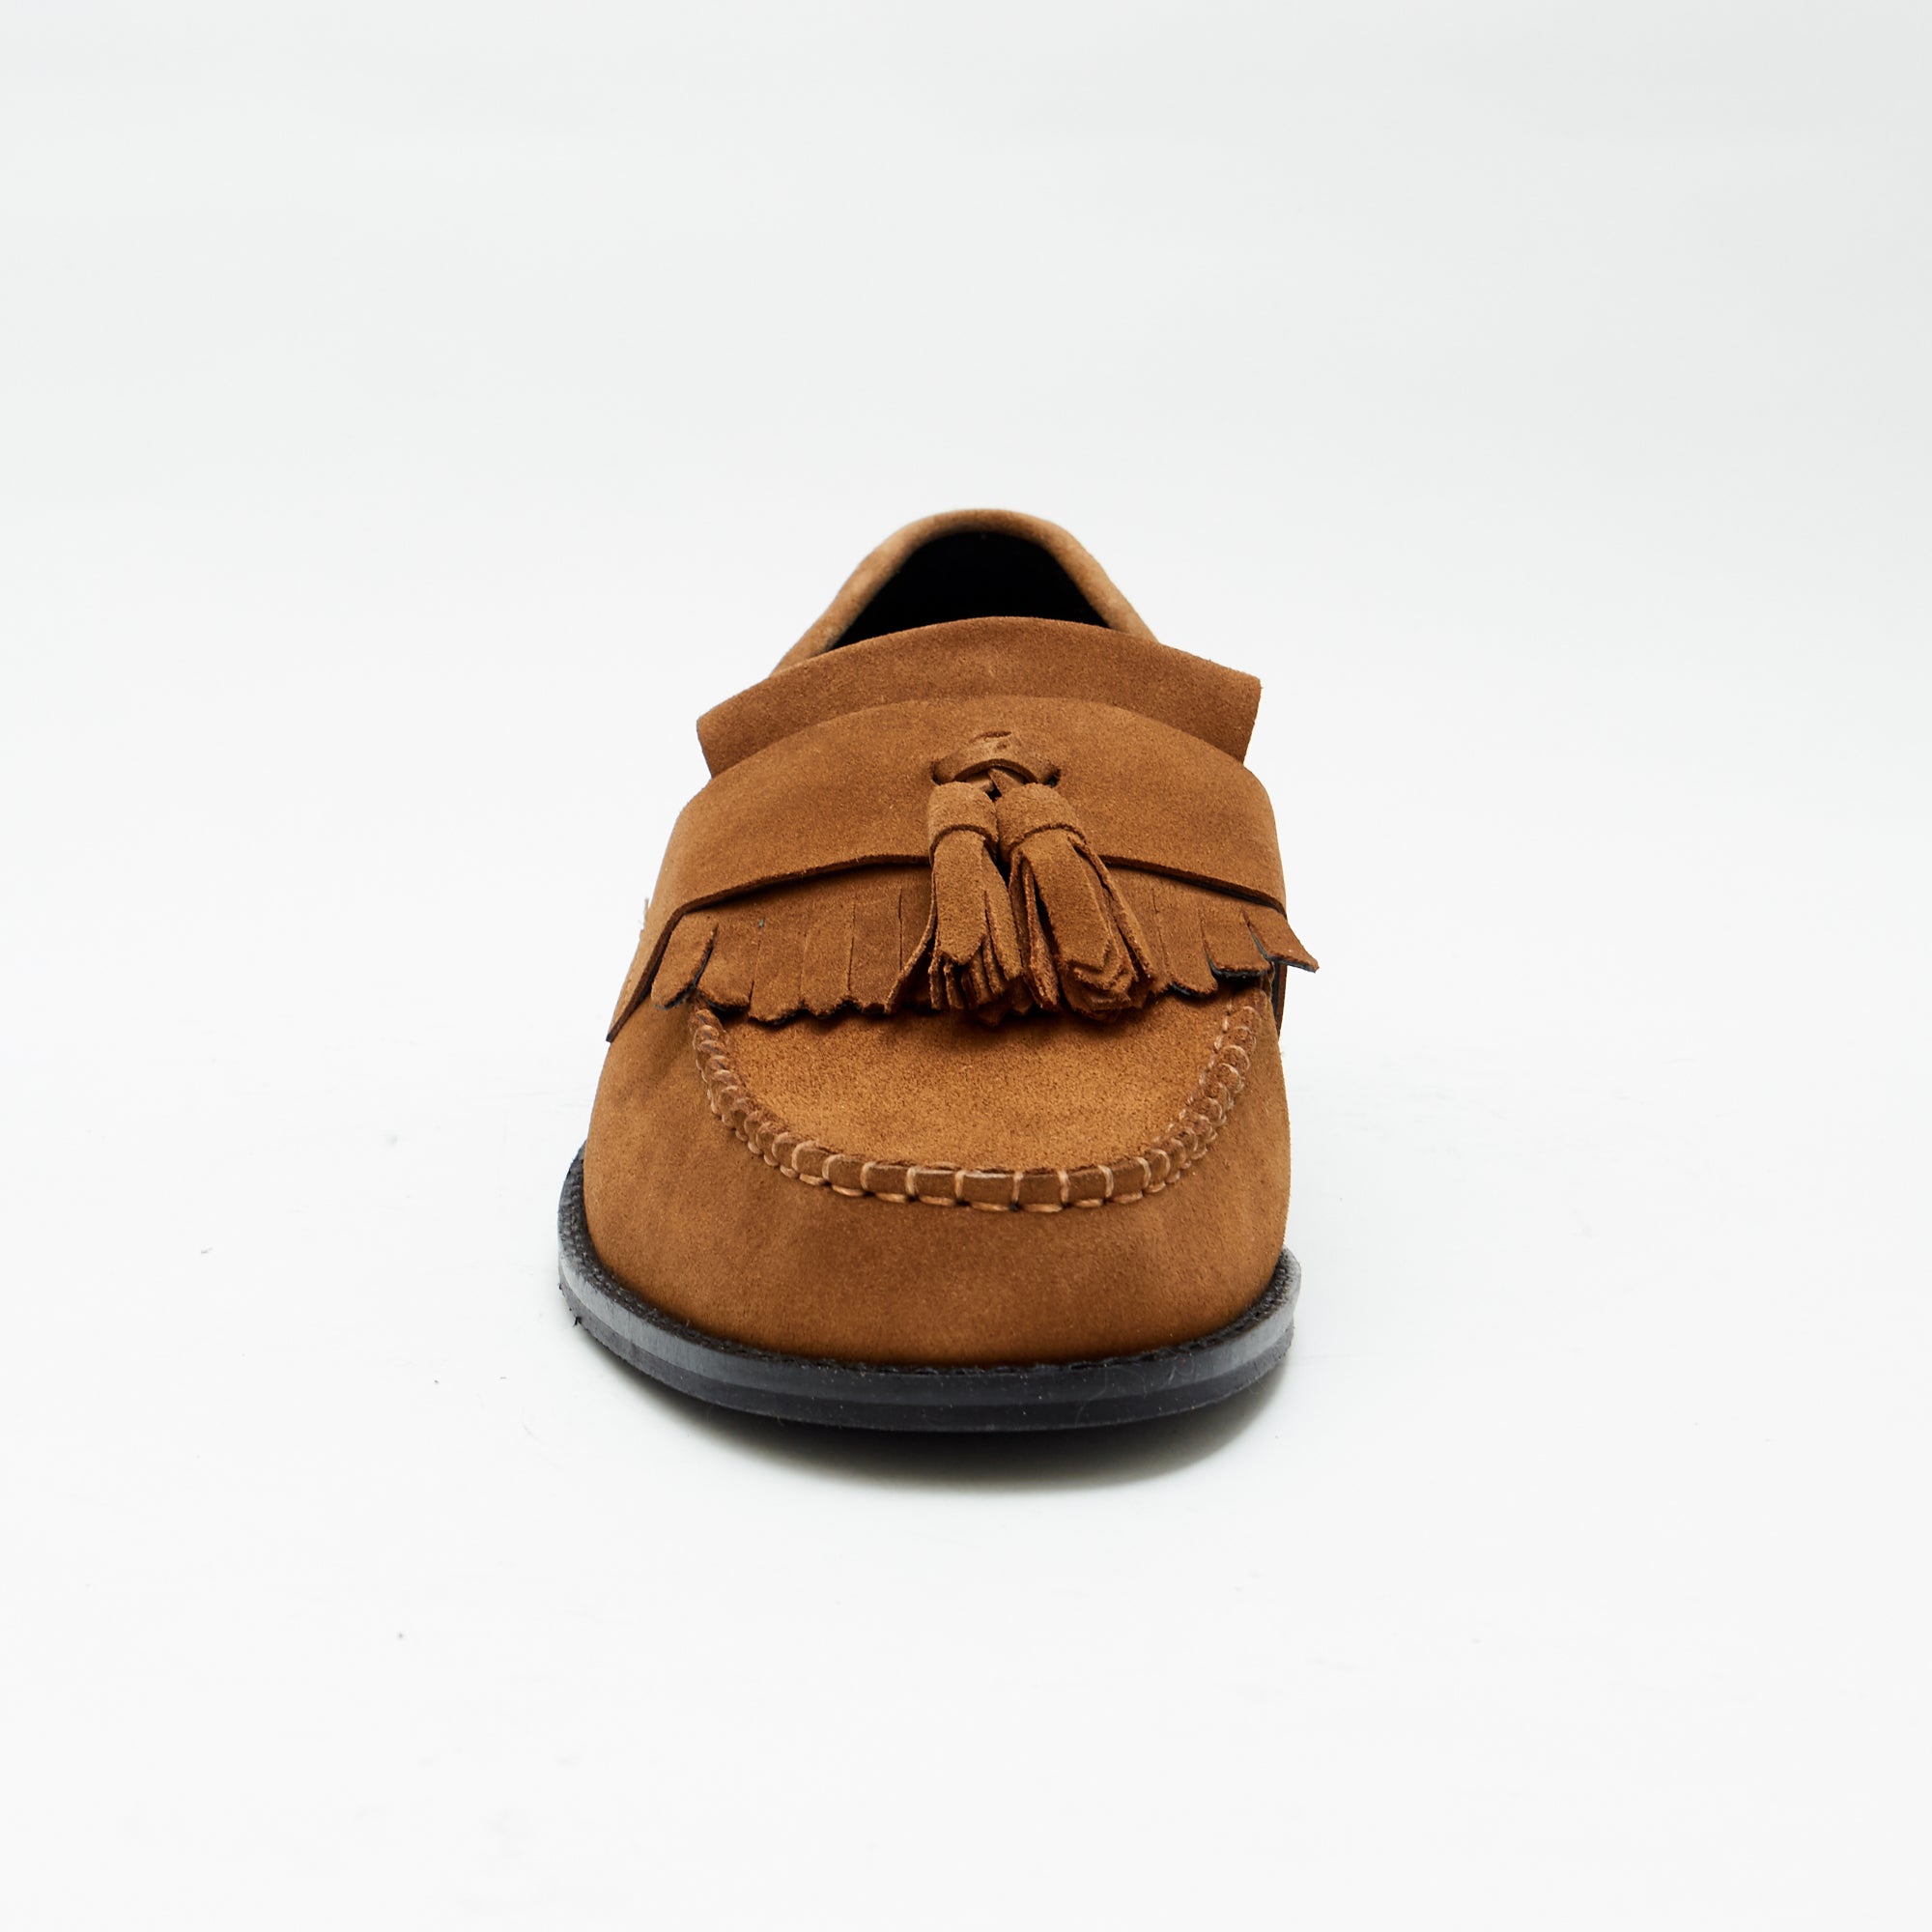 Mens Formal Moccasin Shoes 17999_Snuff Suede